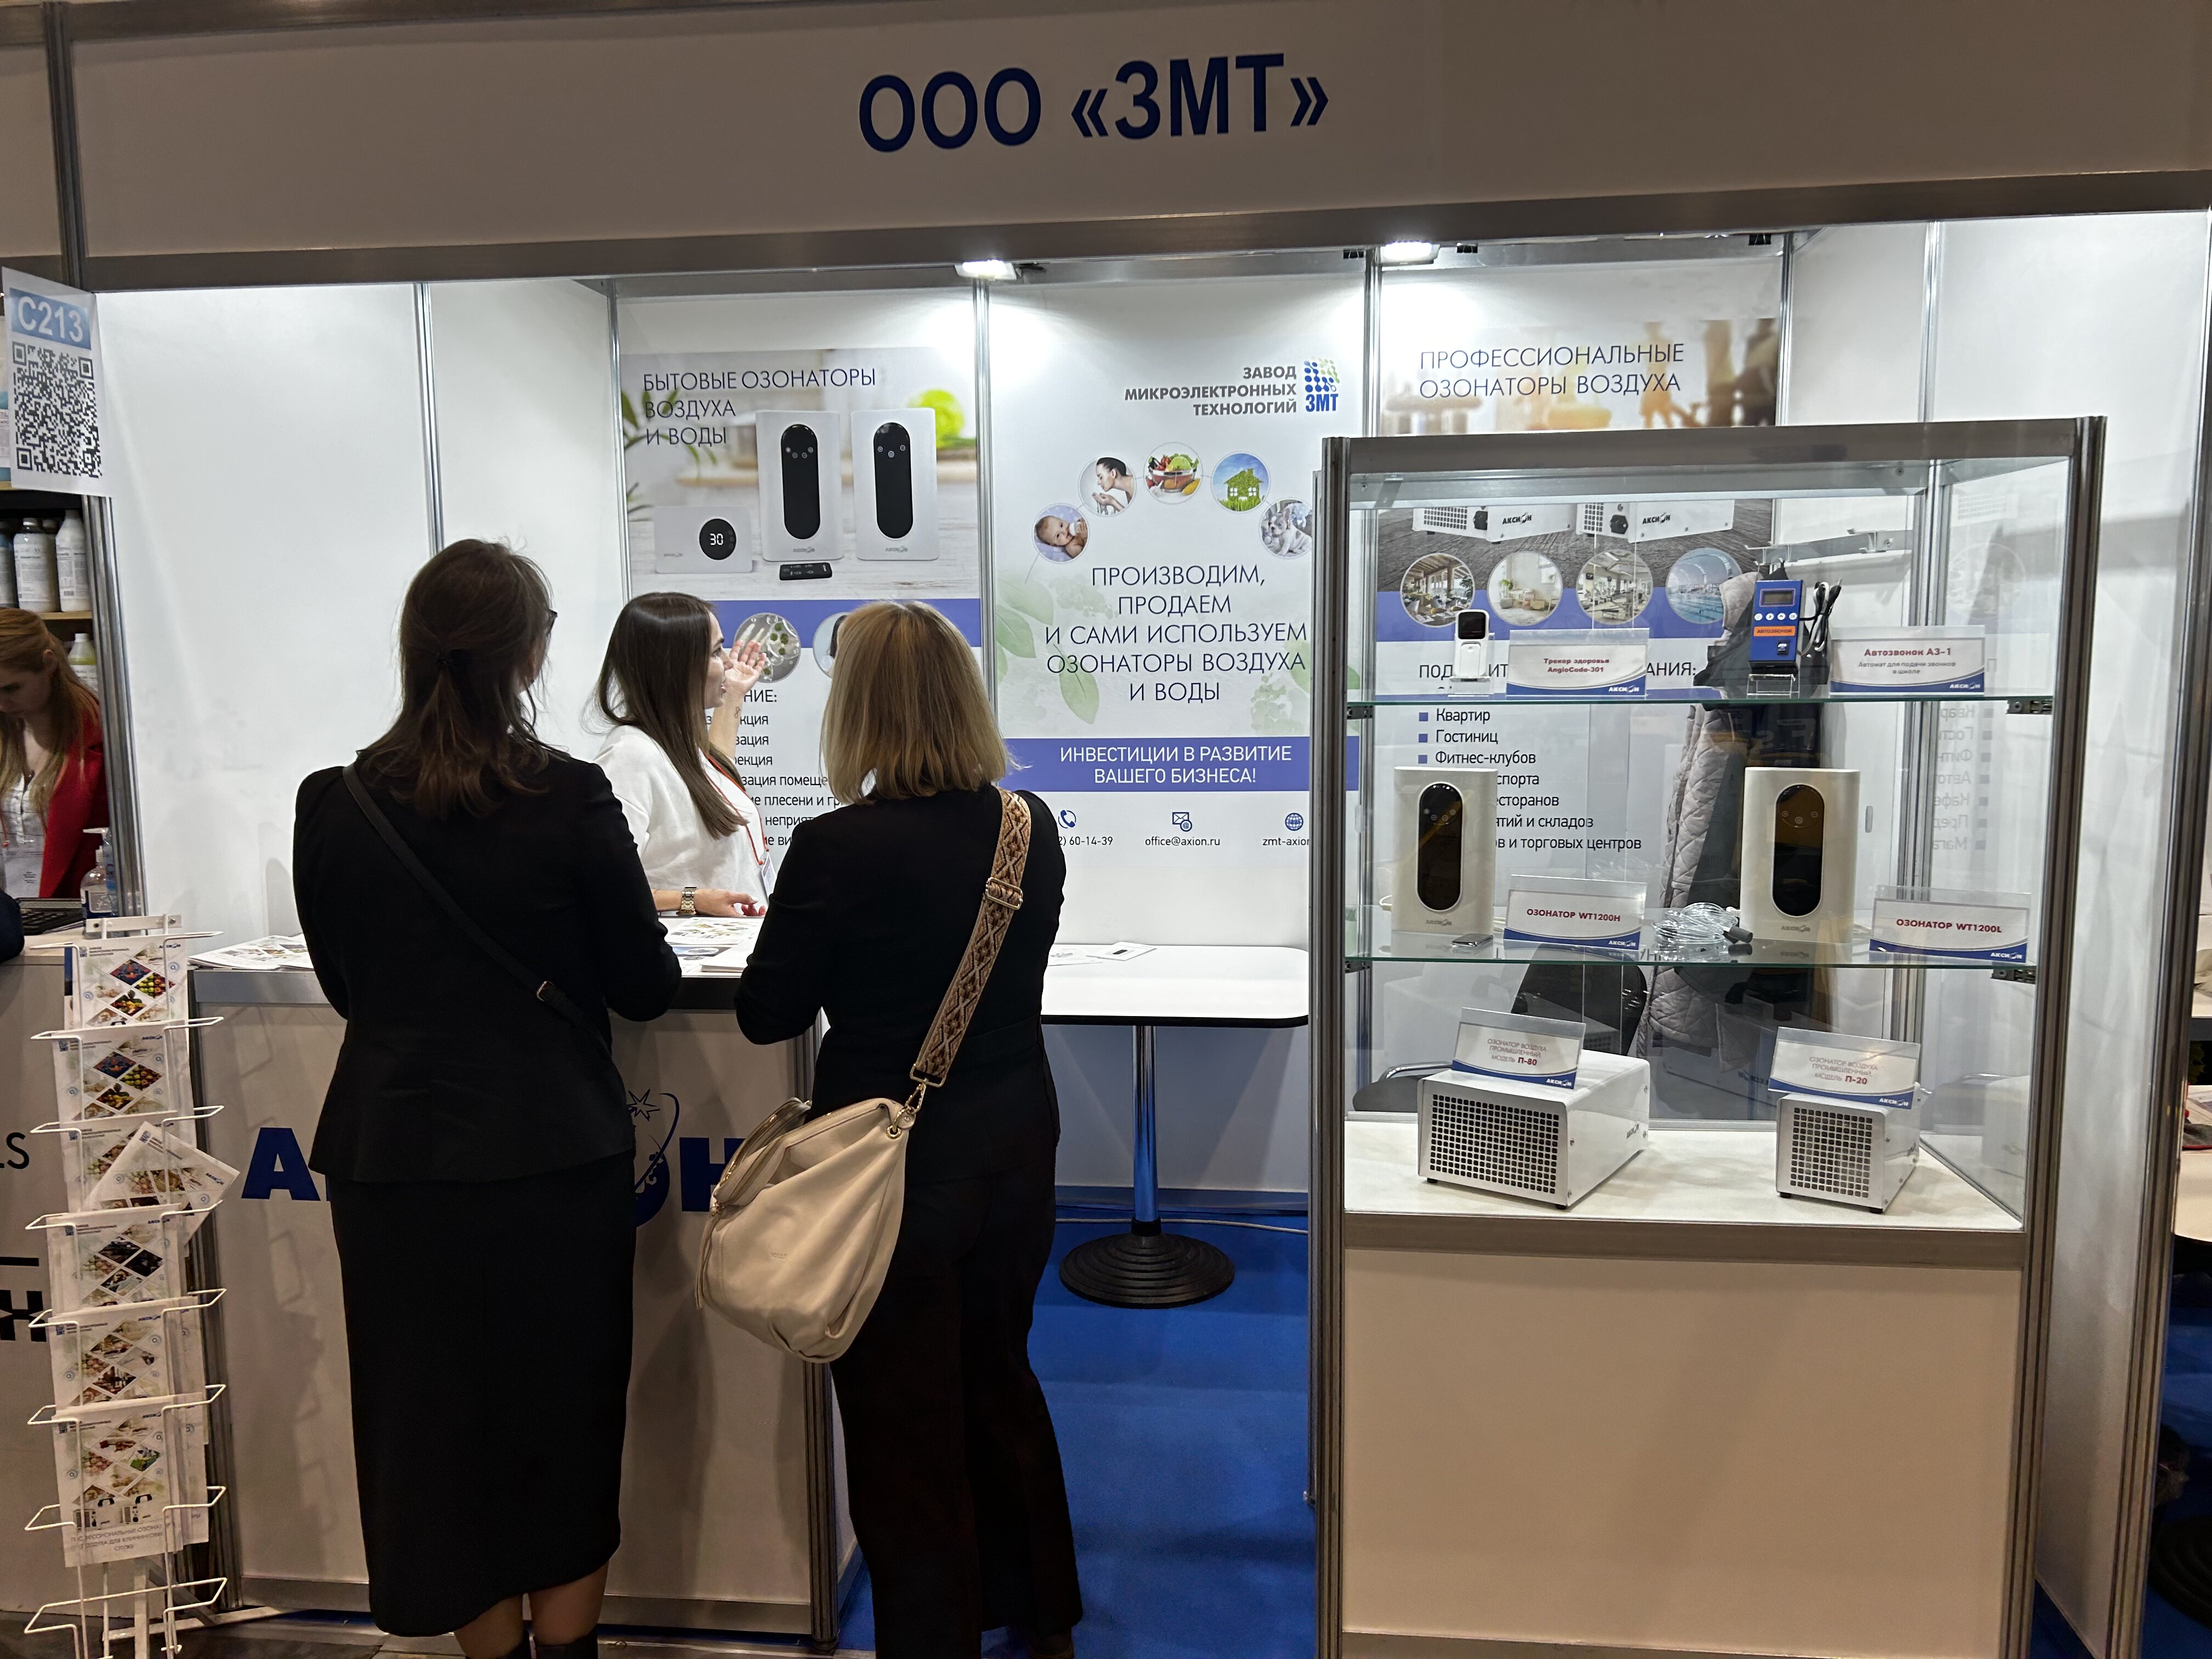 LLC "ZMT" takes part in the International exhibition "CleanExpo St. Petersburg"